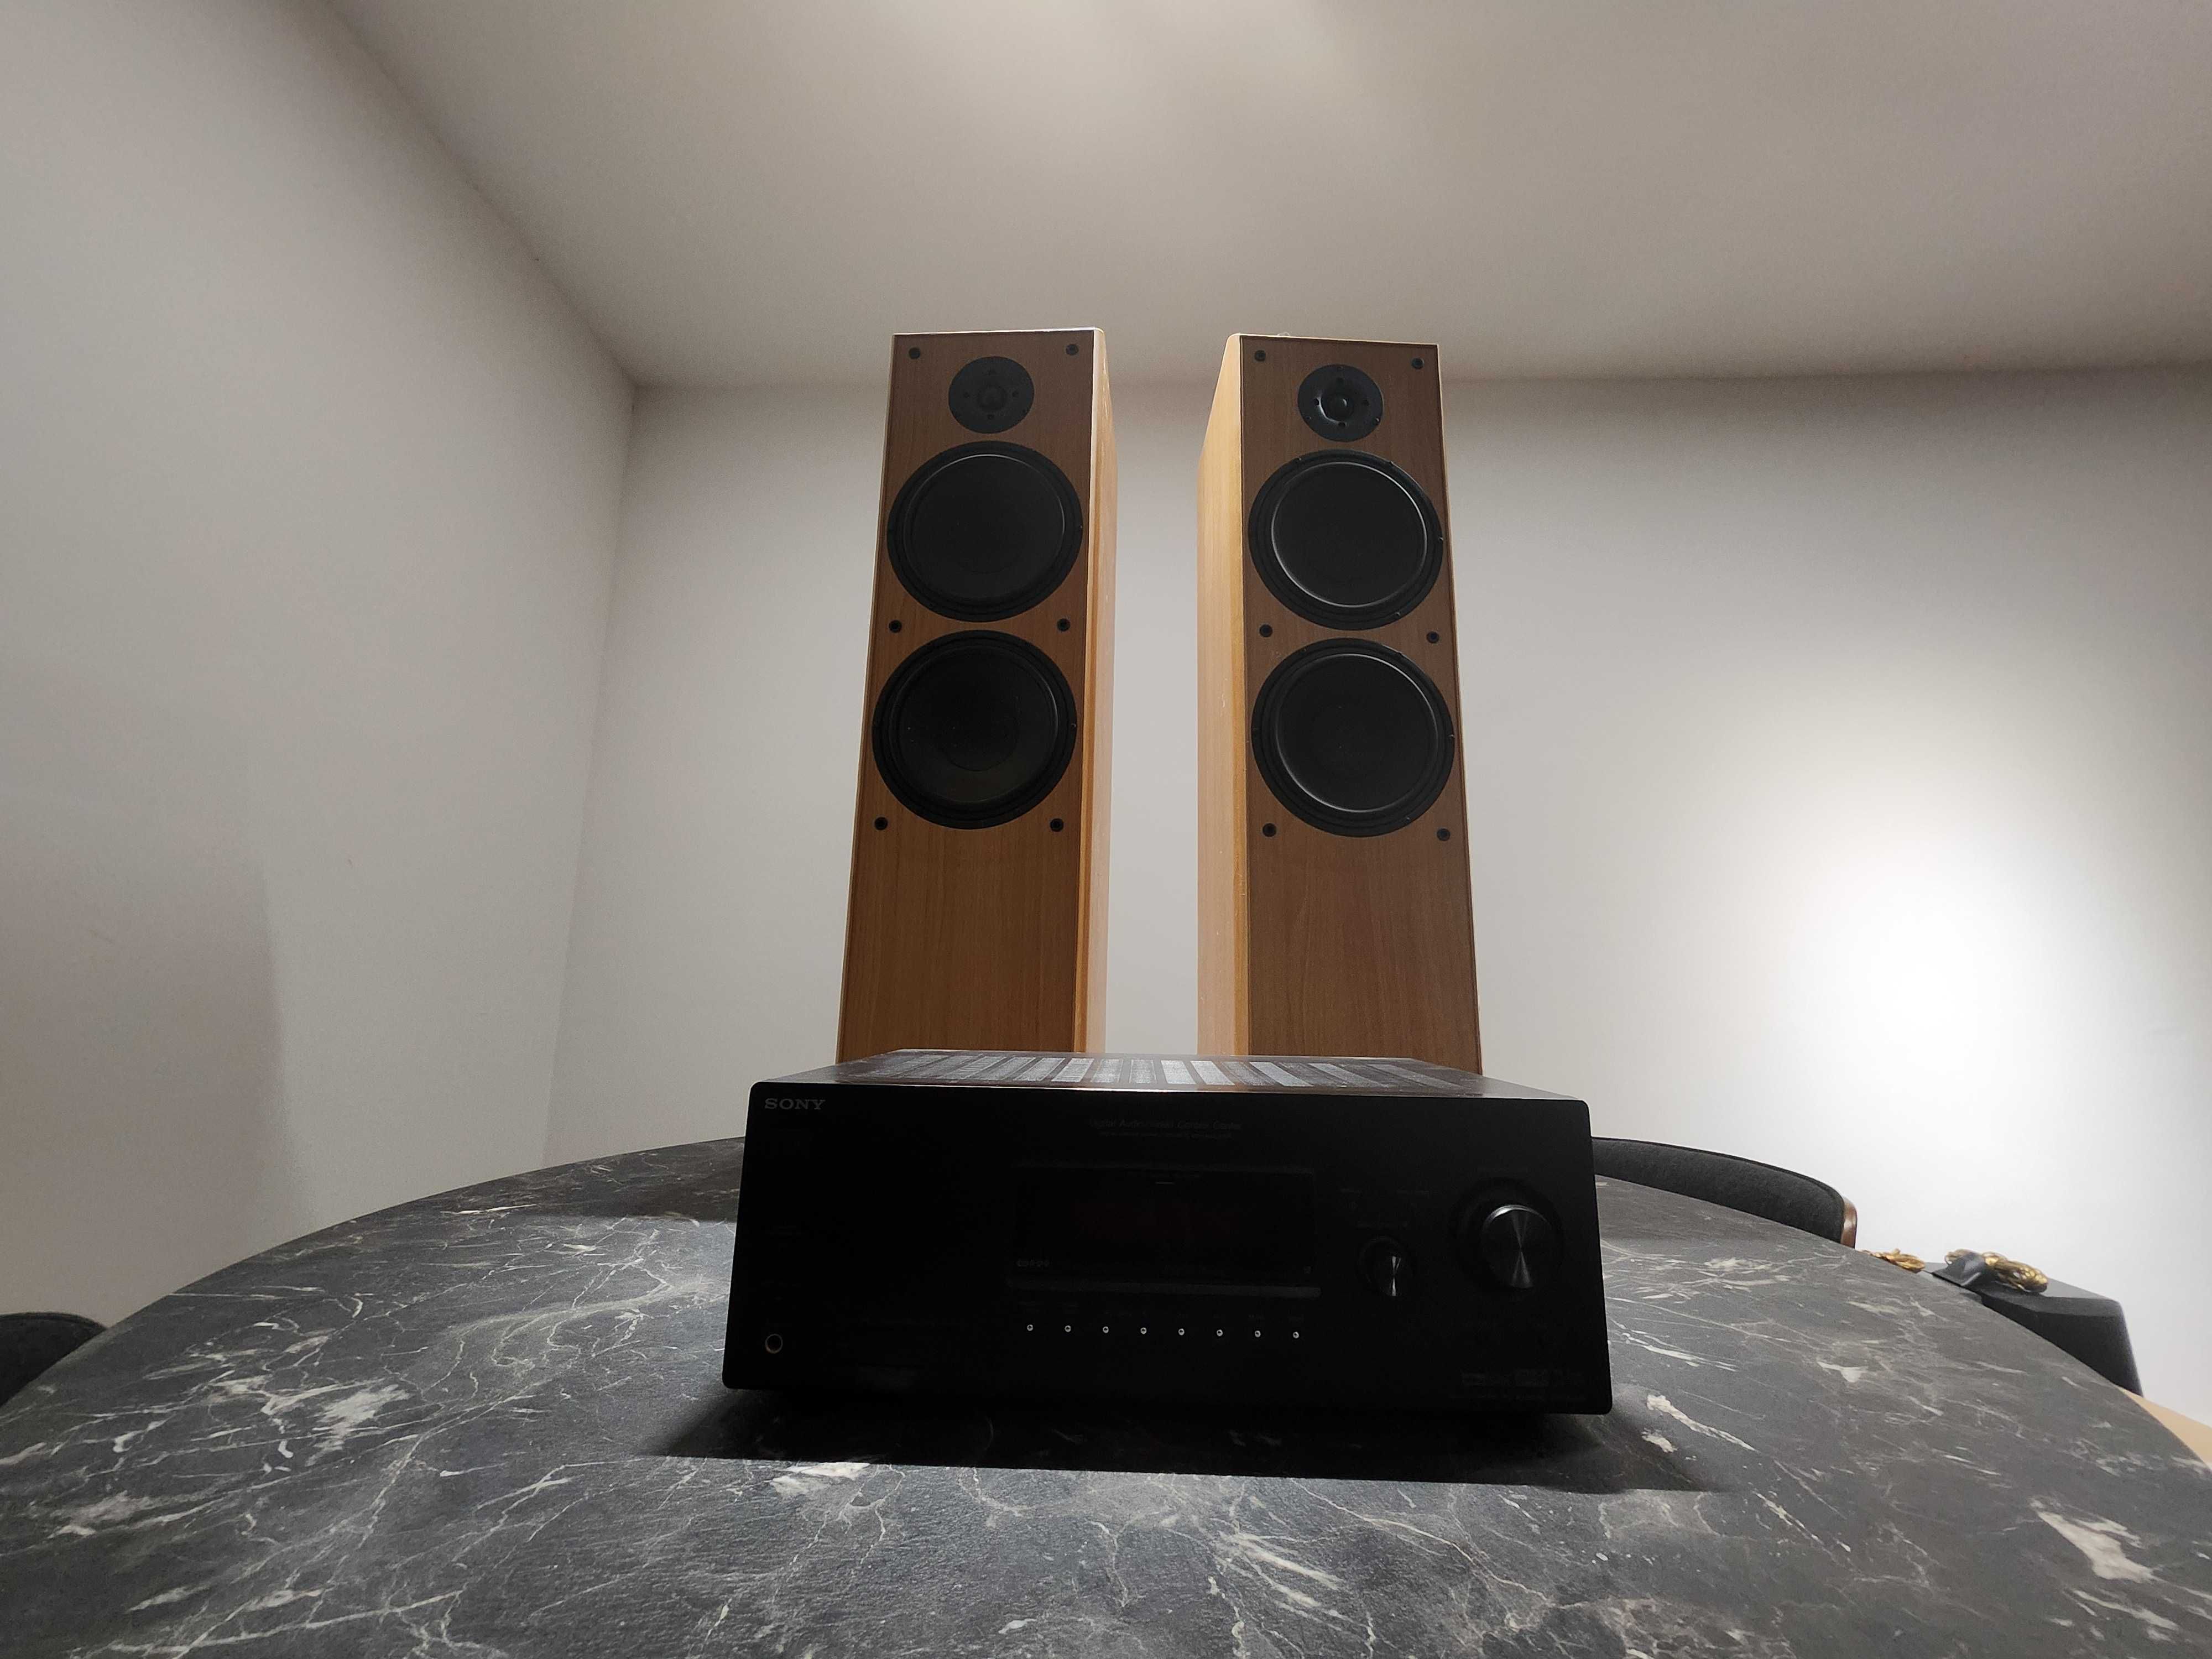 Sony STR-DG500 Home Theater Receiver and Jamo S 408 Speakers